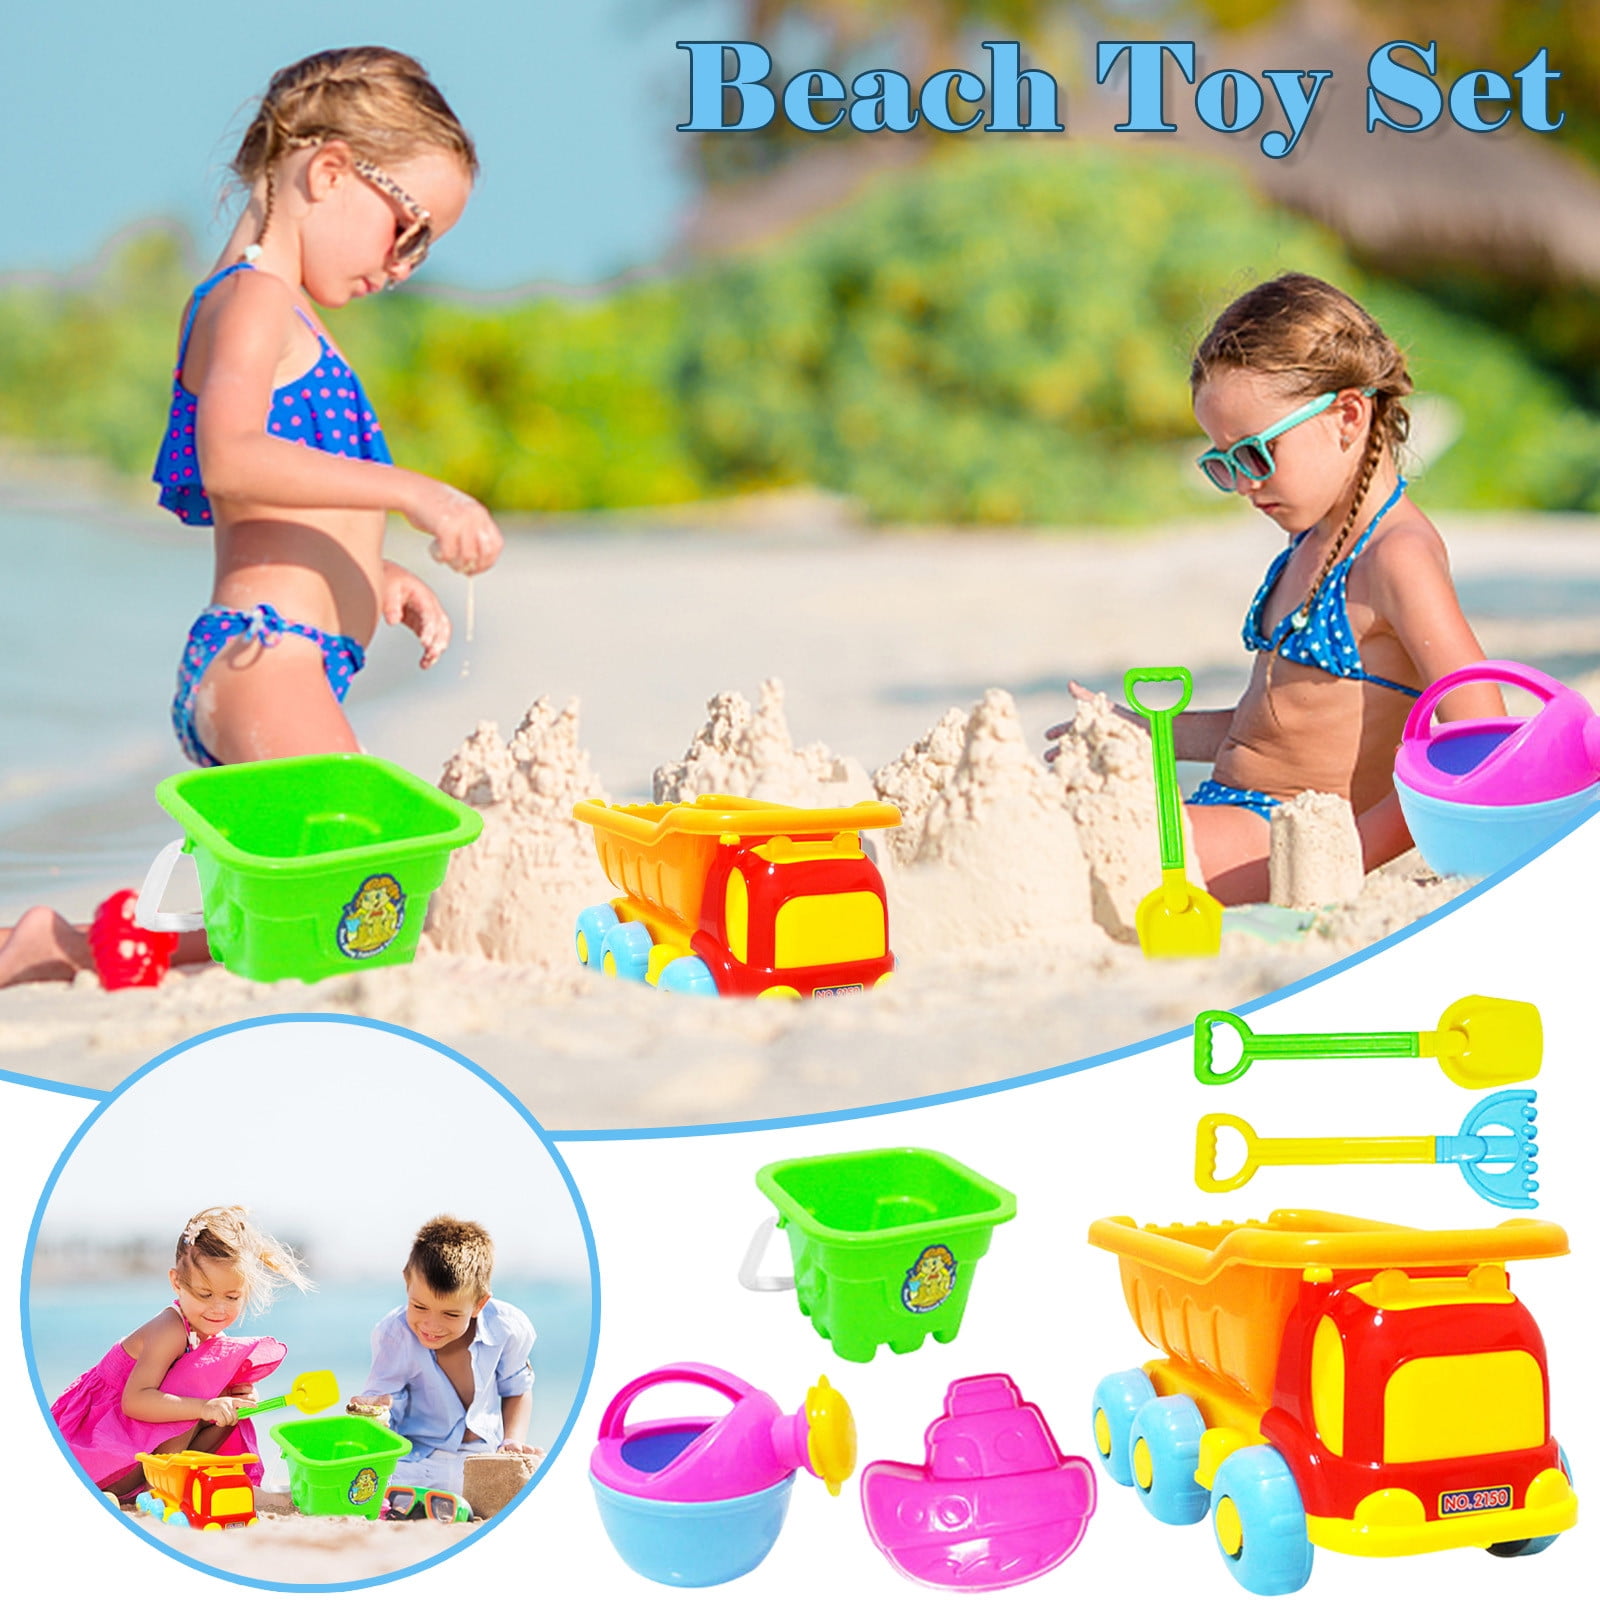 Beach Sand Tools Toys Bucket Set For Toddler Kids Children Outdoor Toy-OL 